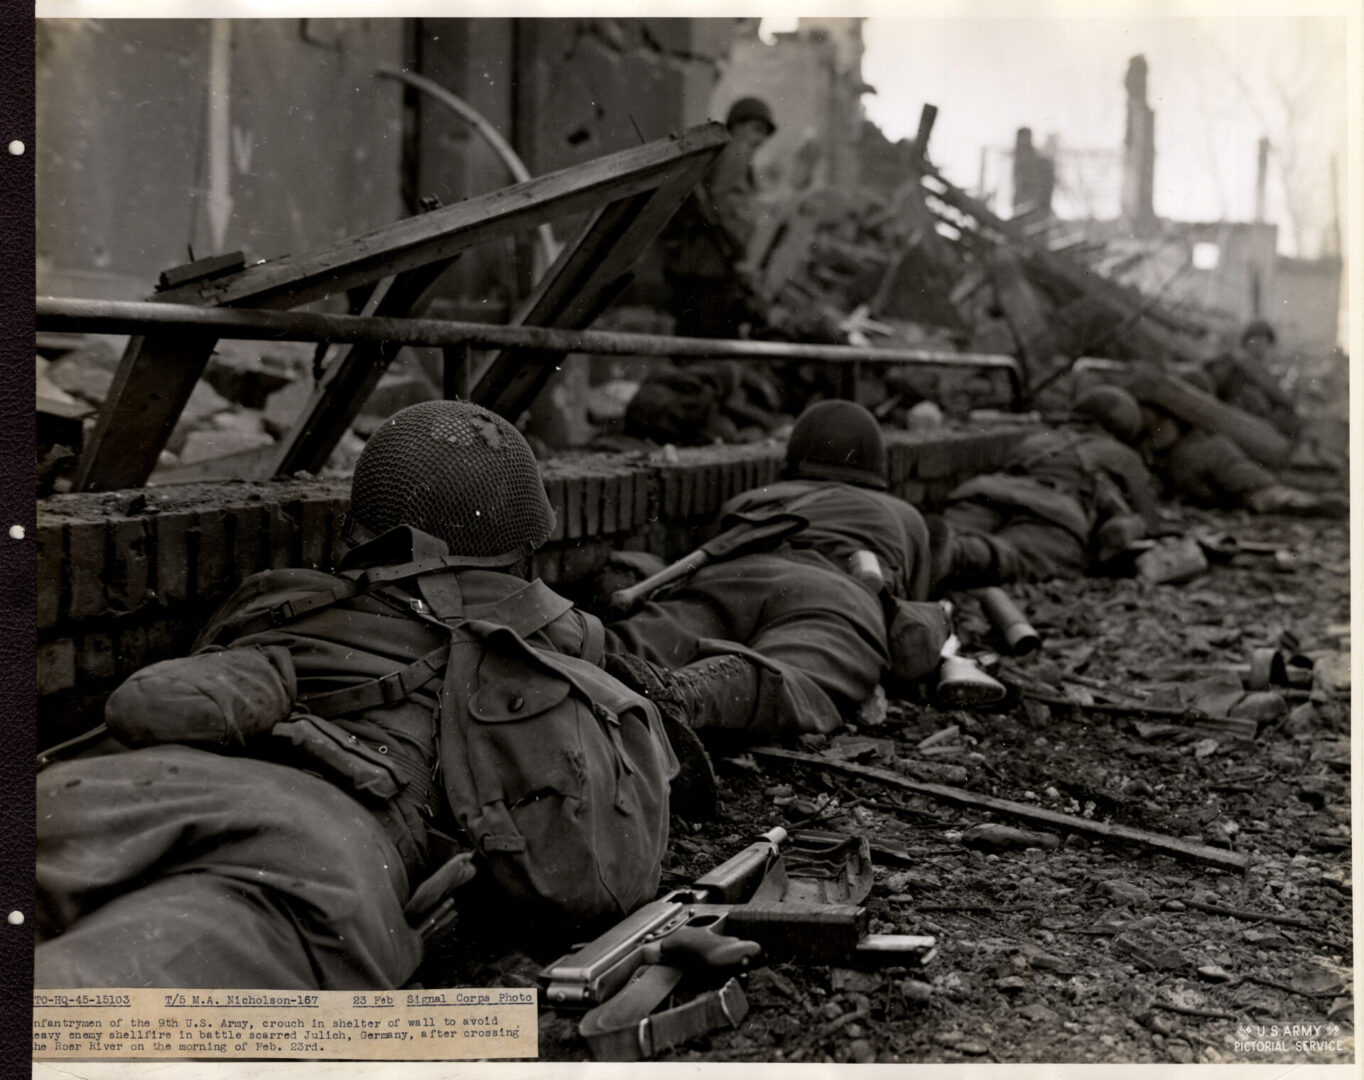 Infantrymen take shelter against a wall during heavy firing